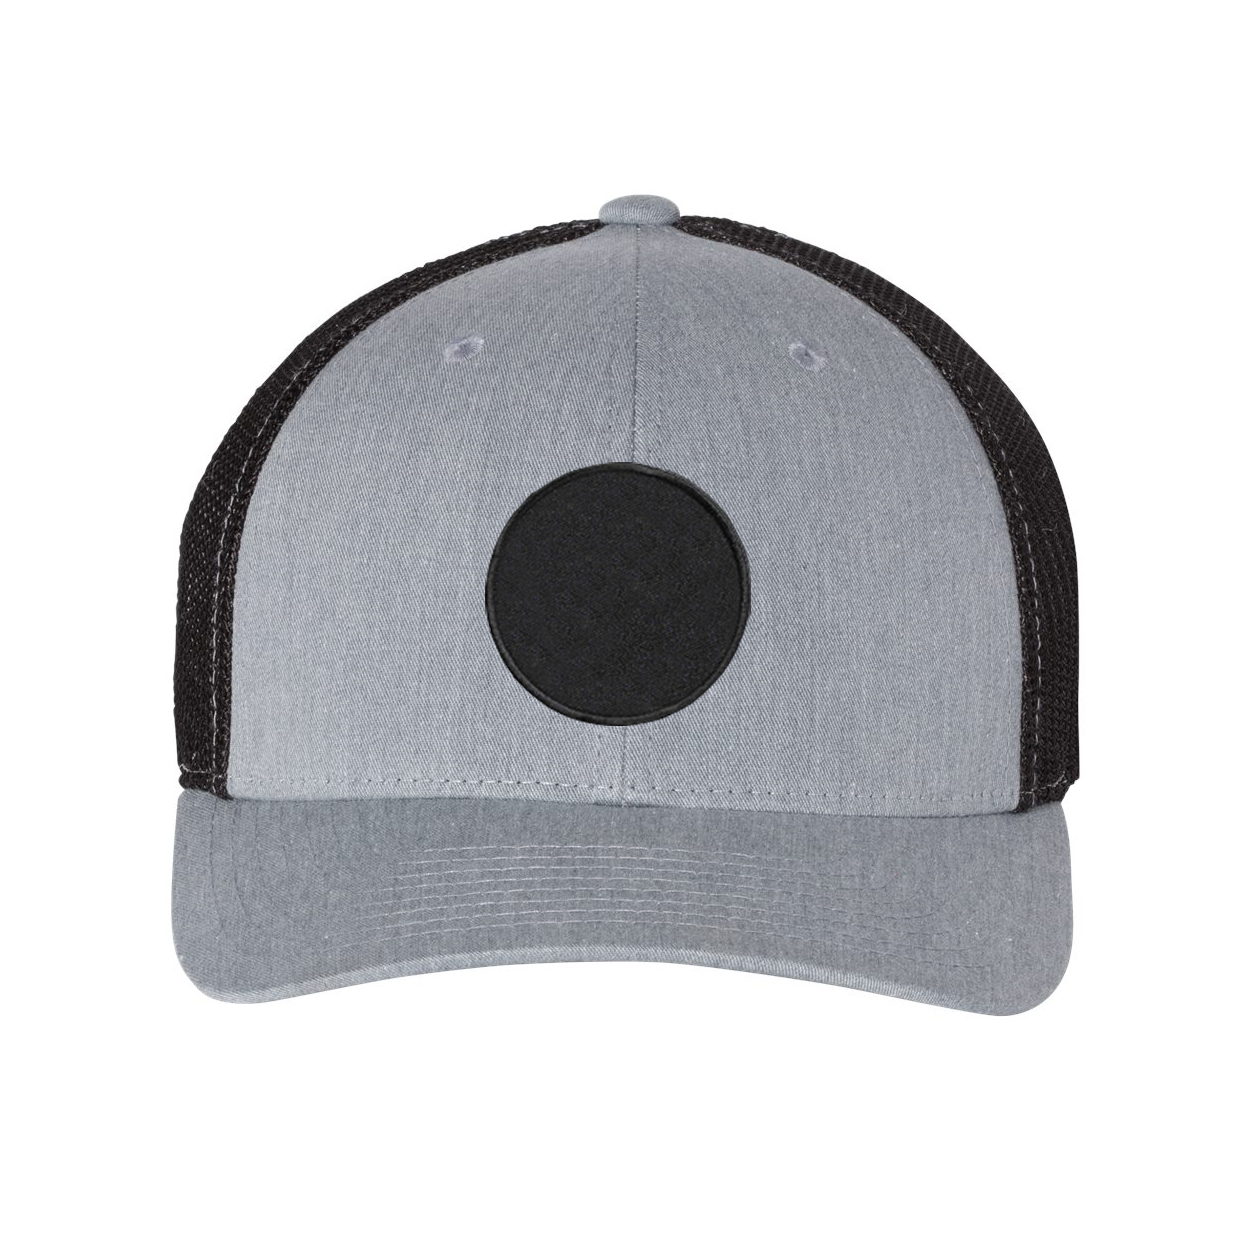 Product Details: Classic Woven Circle Patch Snapback Trucker Hat Heather Gray/Black (BW 6 PANEL SNAPBACK MESH 5216)